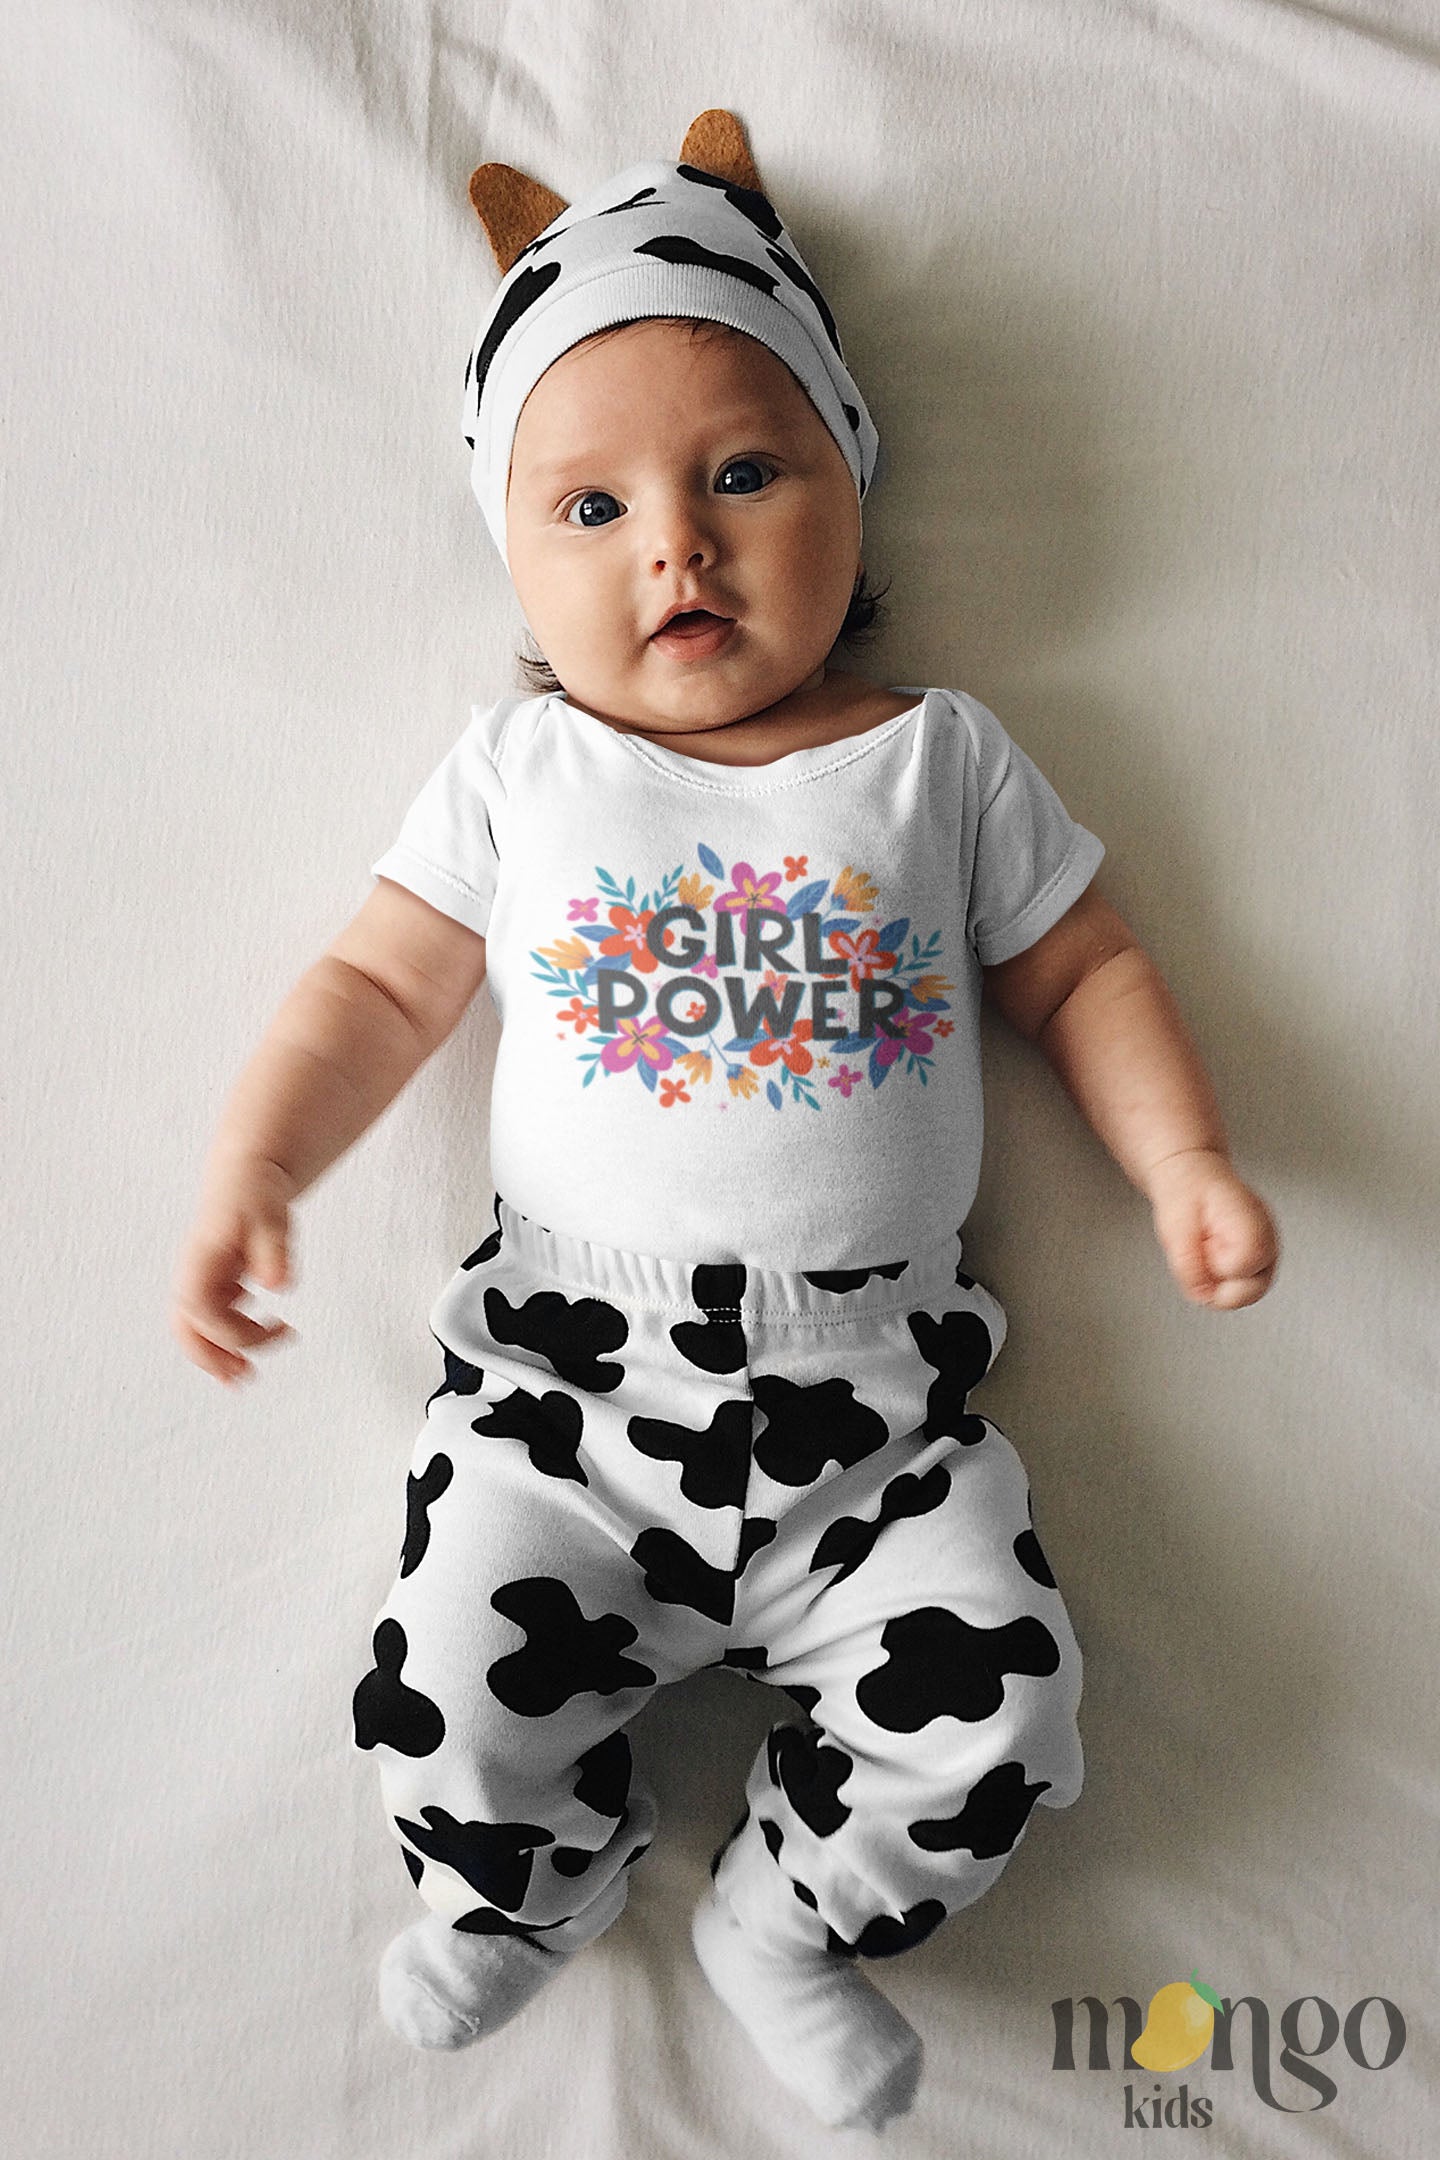 White Short Sleeve Baby Bodysuit with a floral icon and the text 'Girl Power.' This empowering design celebrates the strength and confidence of girls.